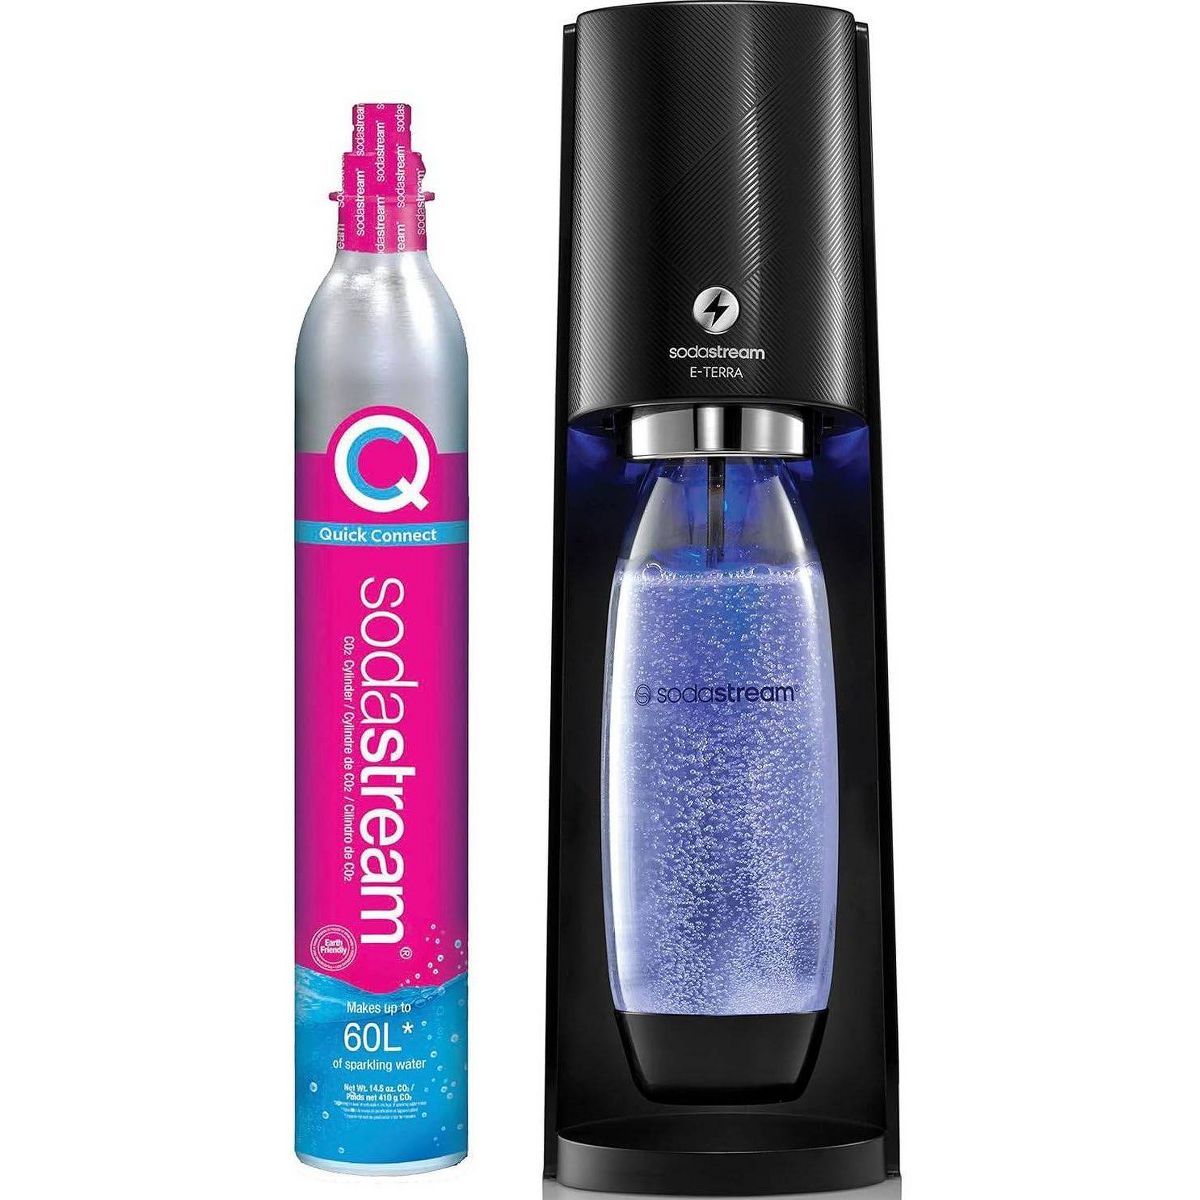 SodaStream E-TERRA Sparkling Water Maker with CO2 and Carbonating Bottle | Target